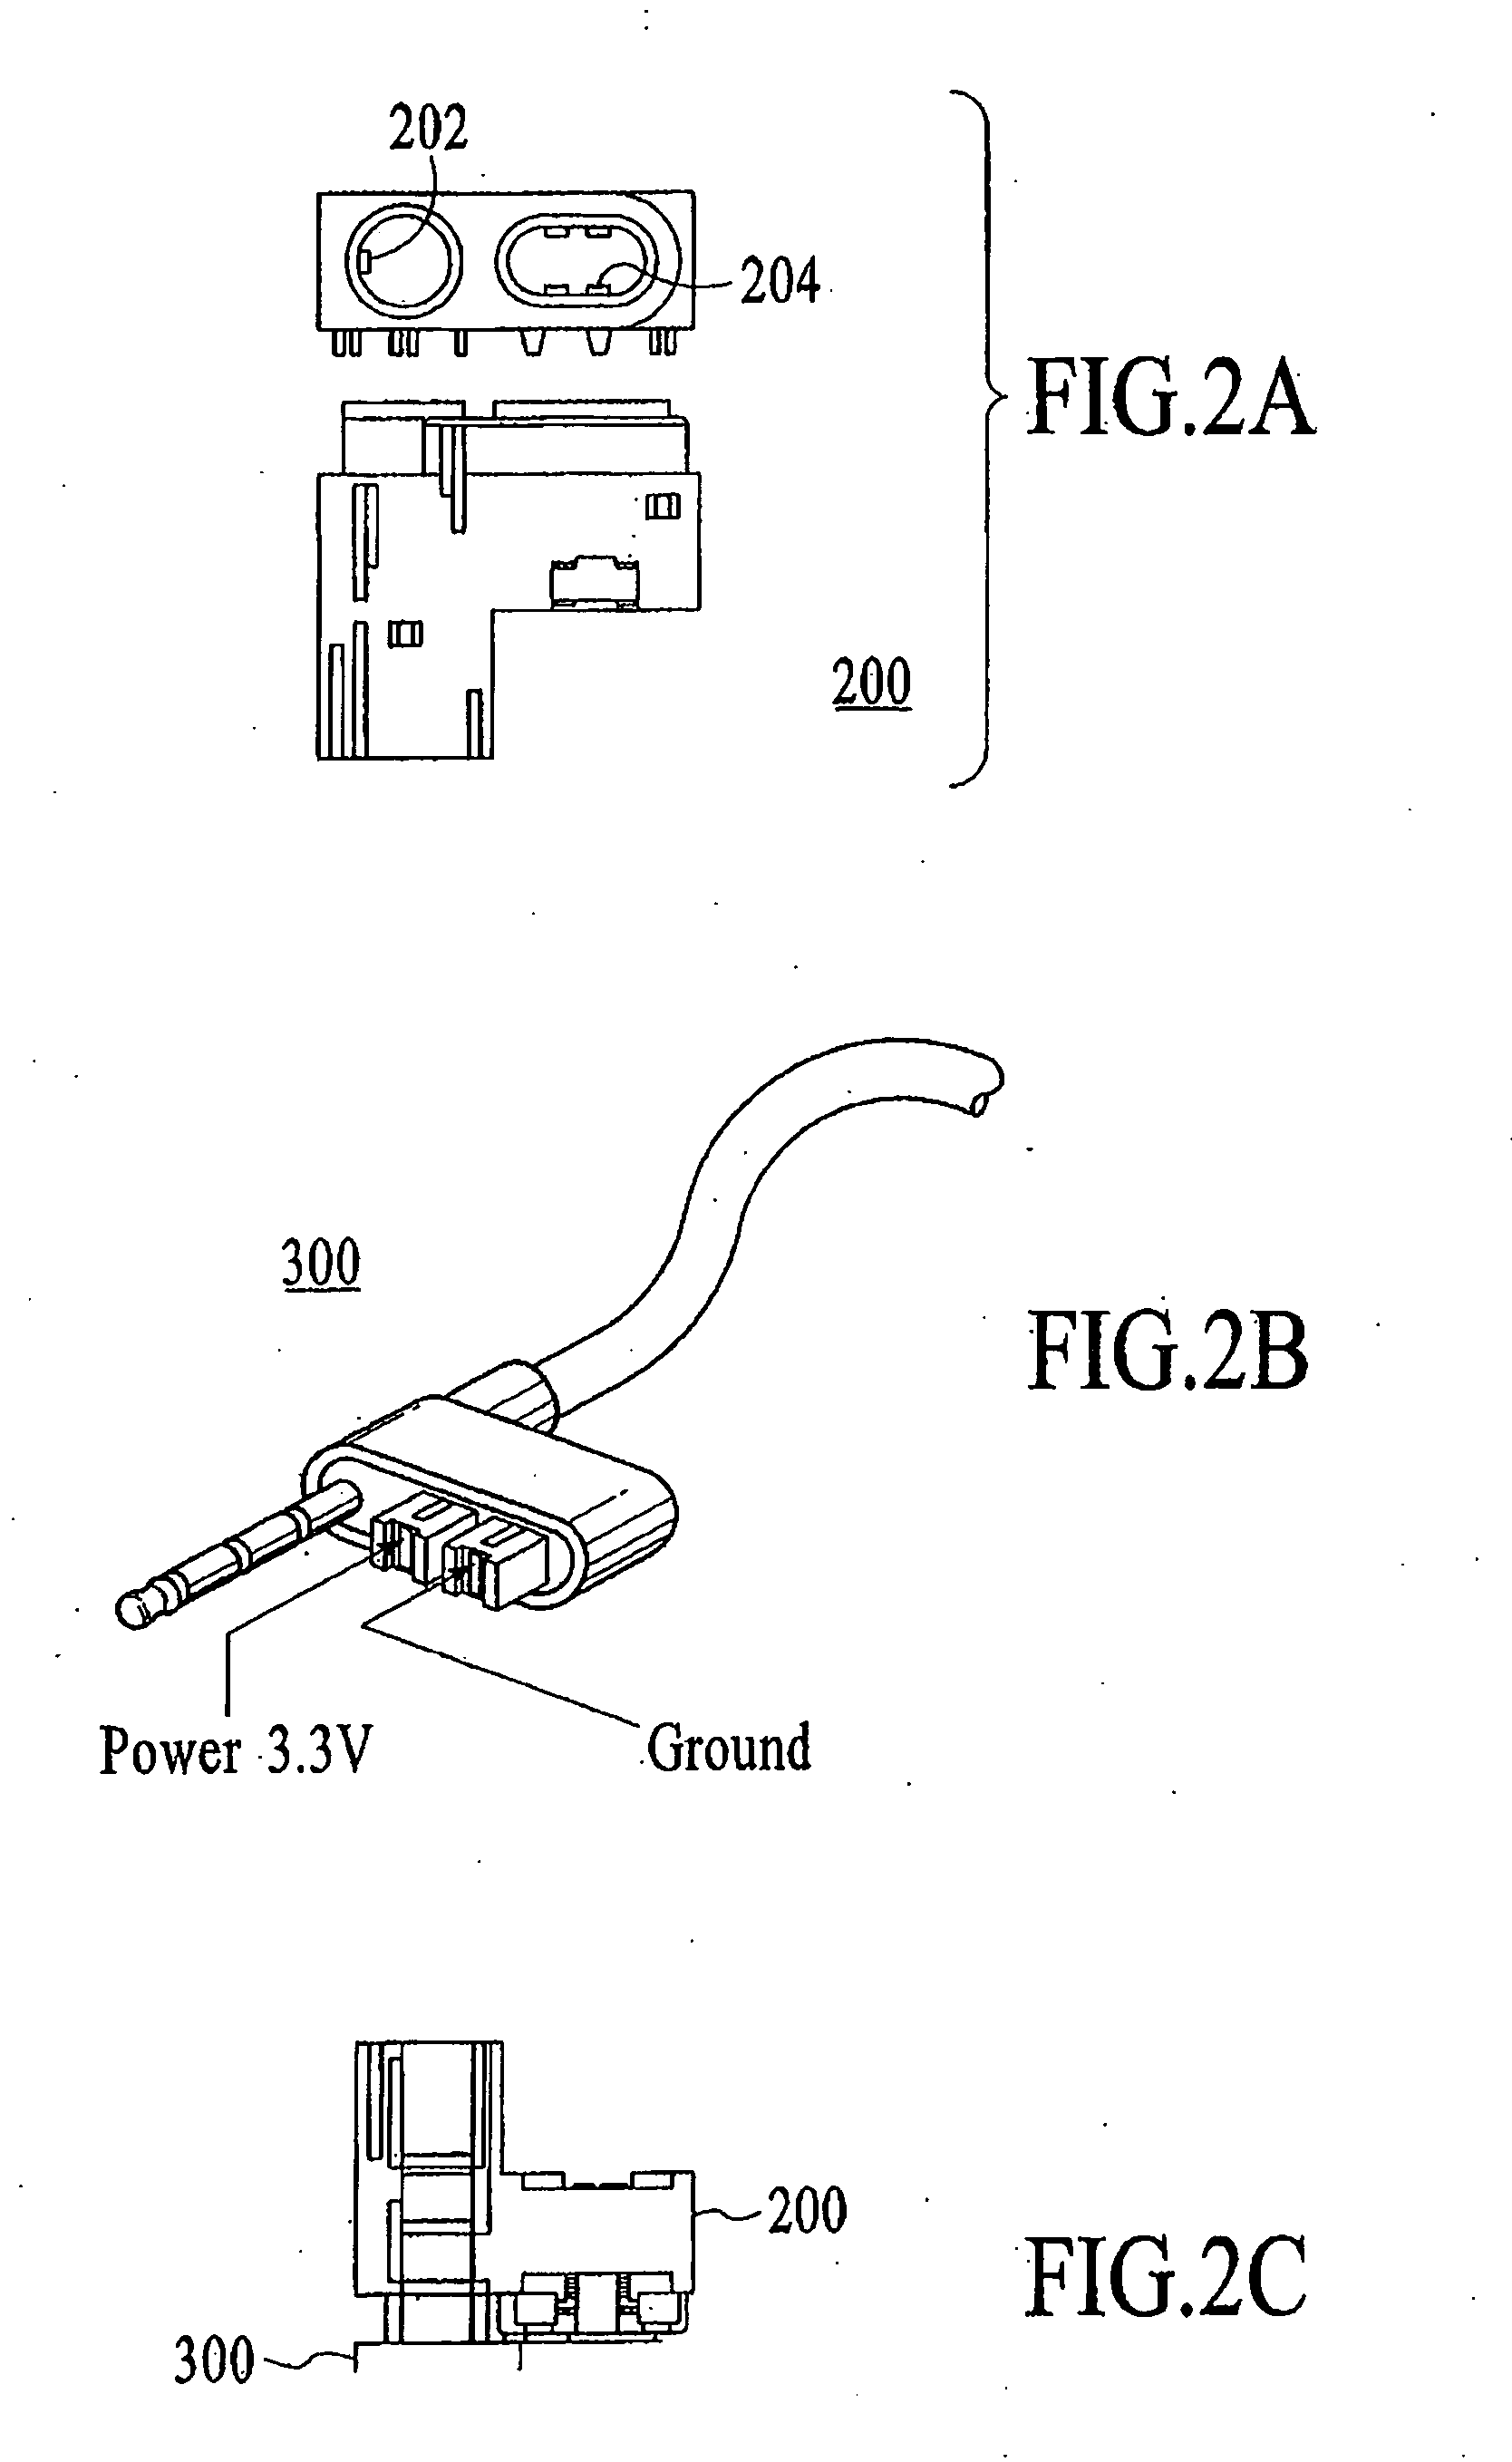 Method and system for authenticating an accessory